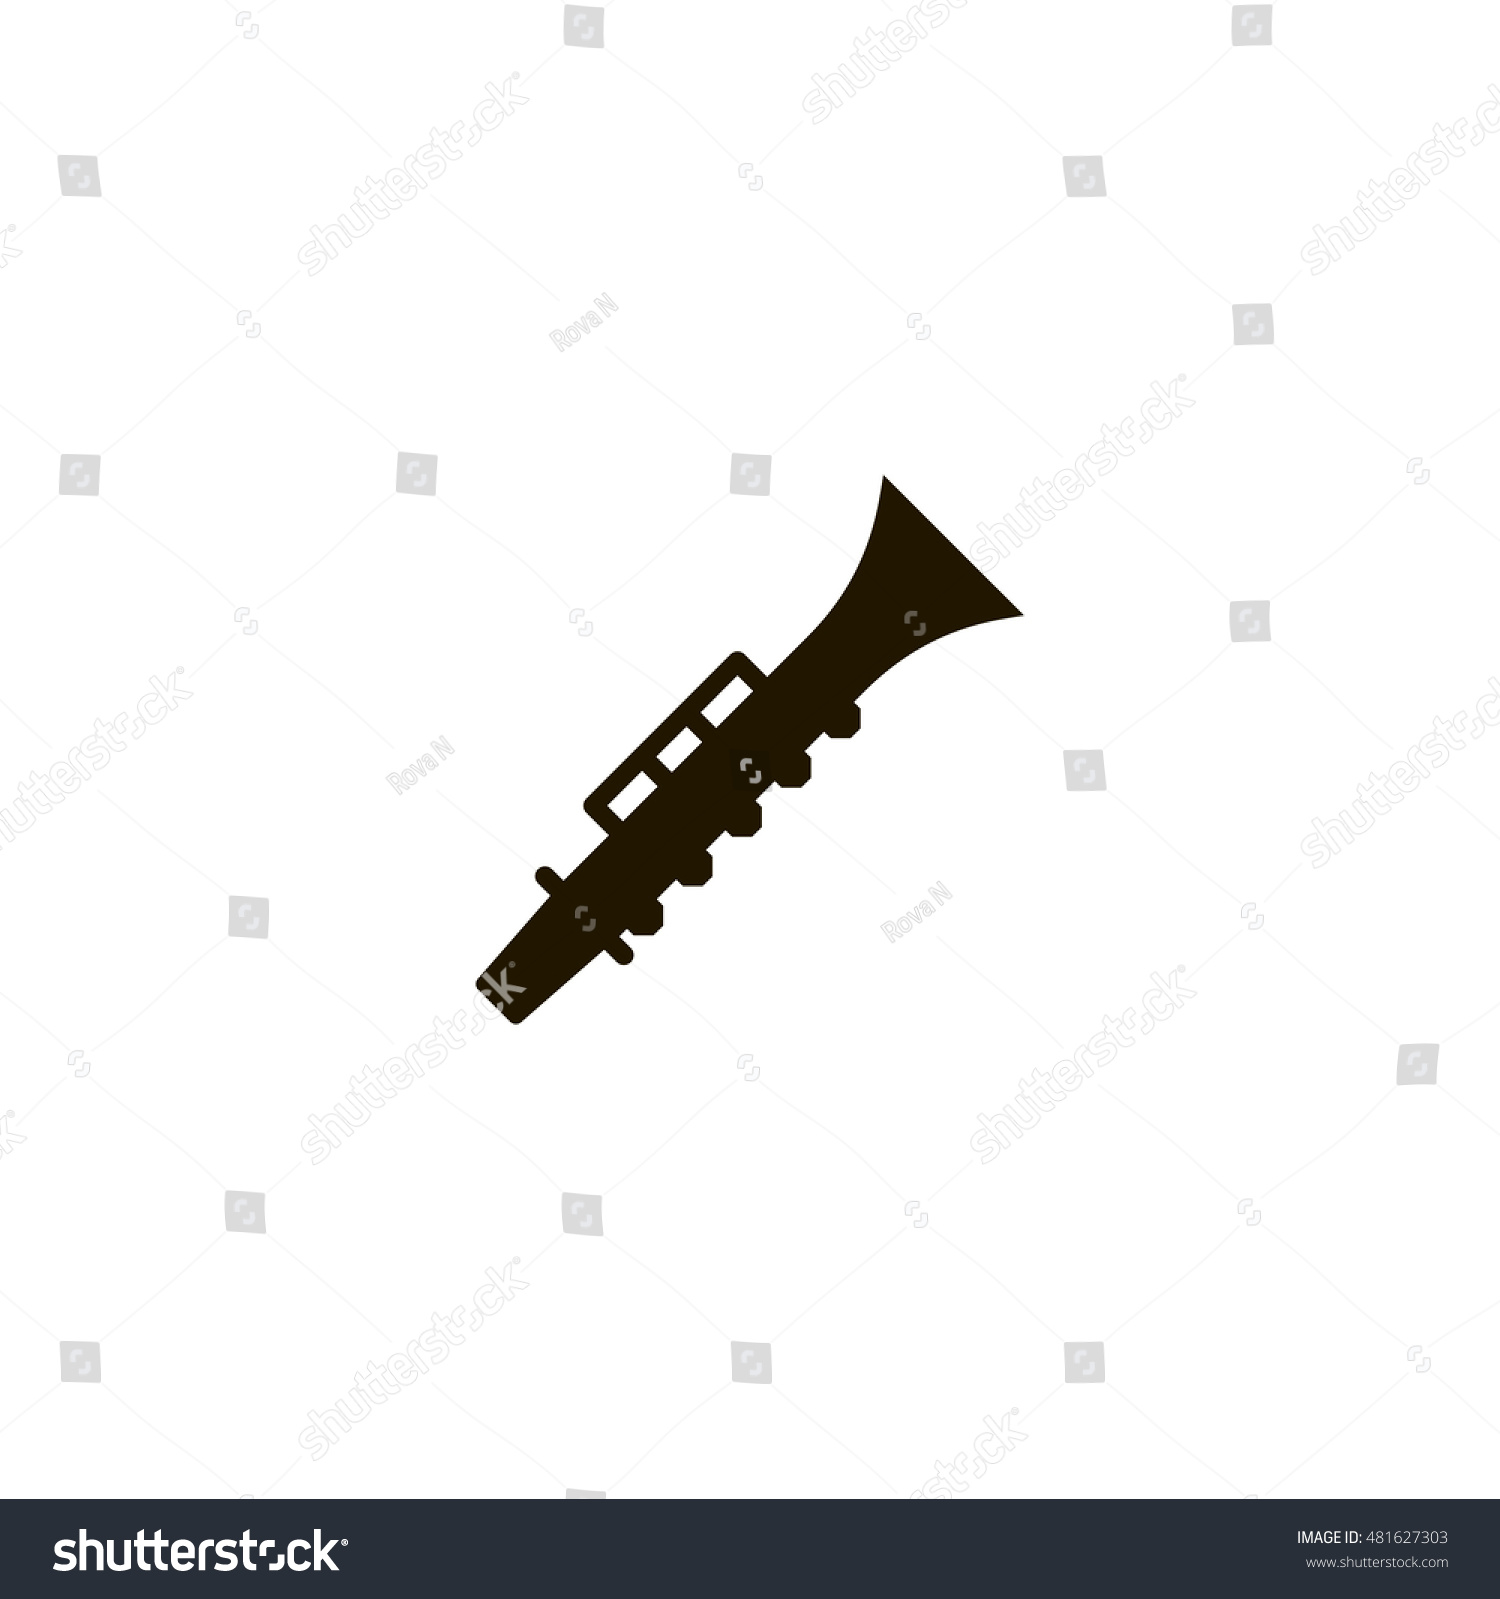 Clarinet png #41312 - Free Icons and PNG Backgrounds